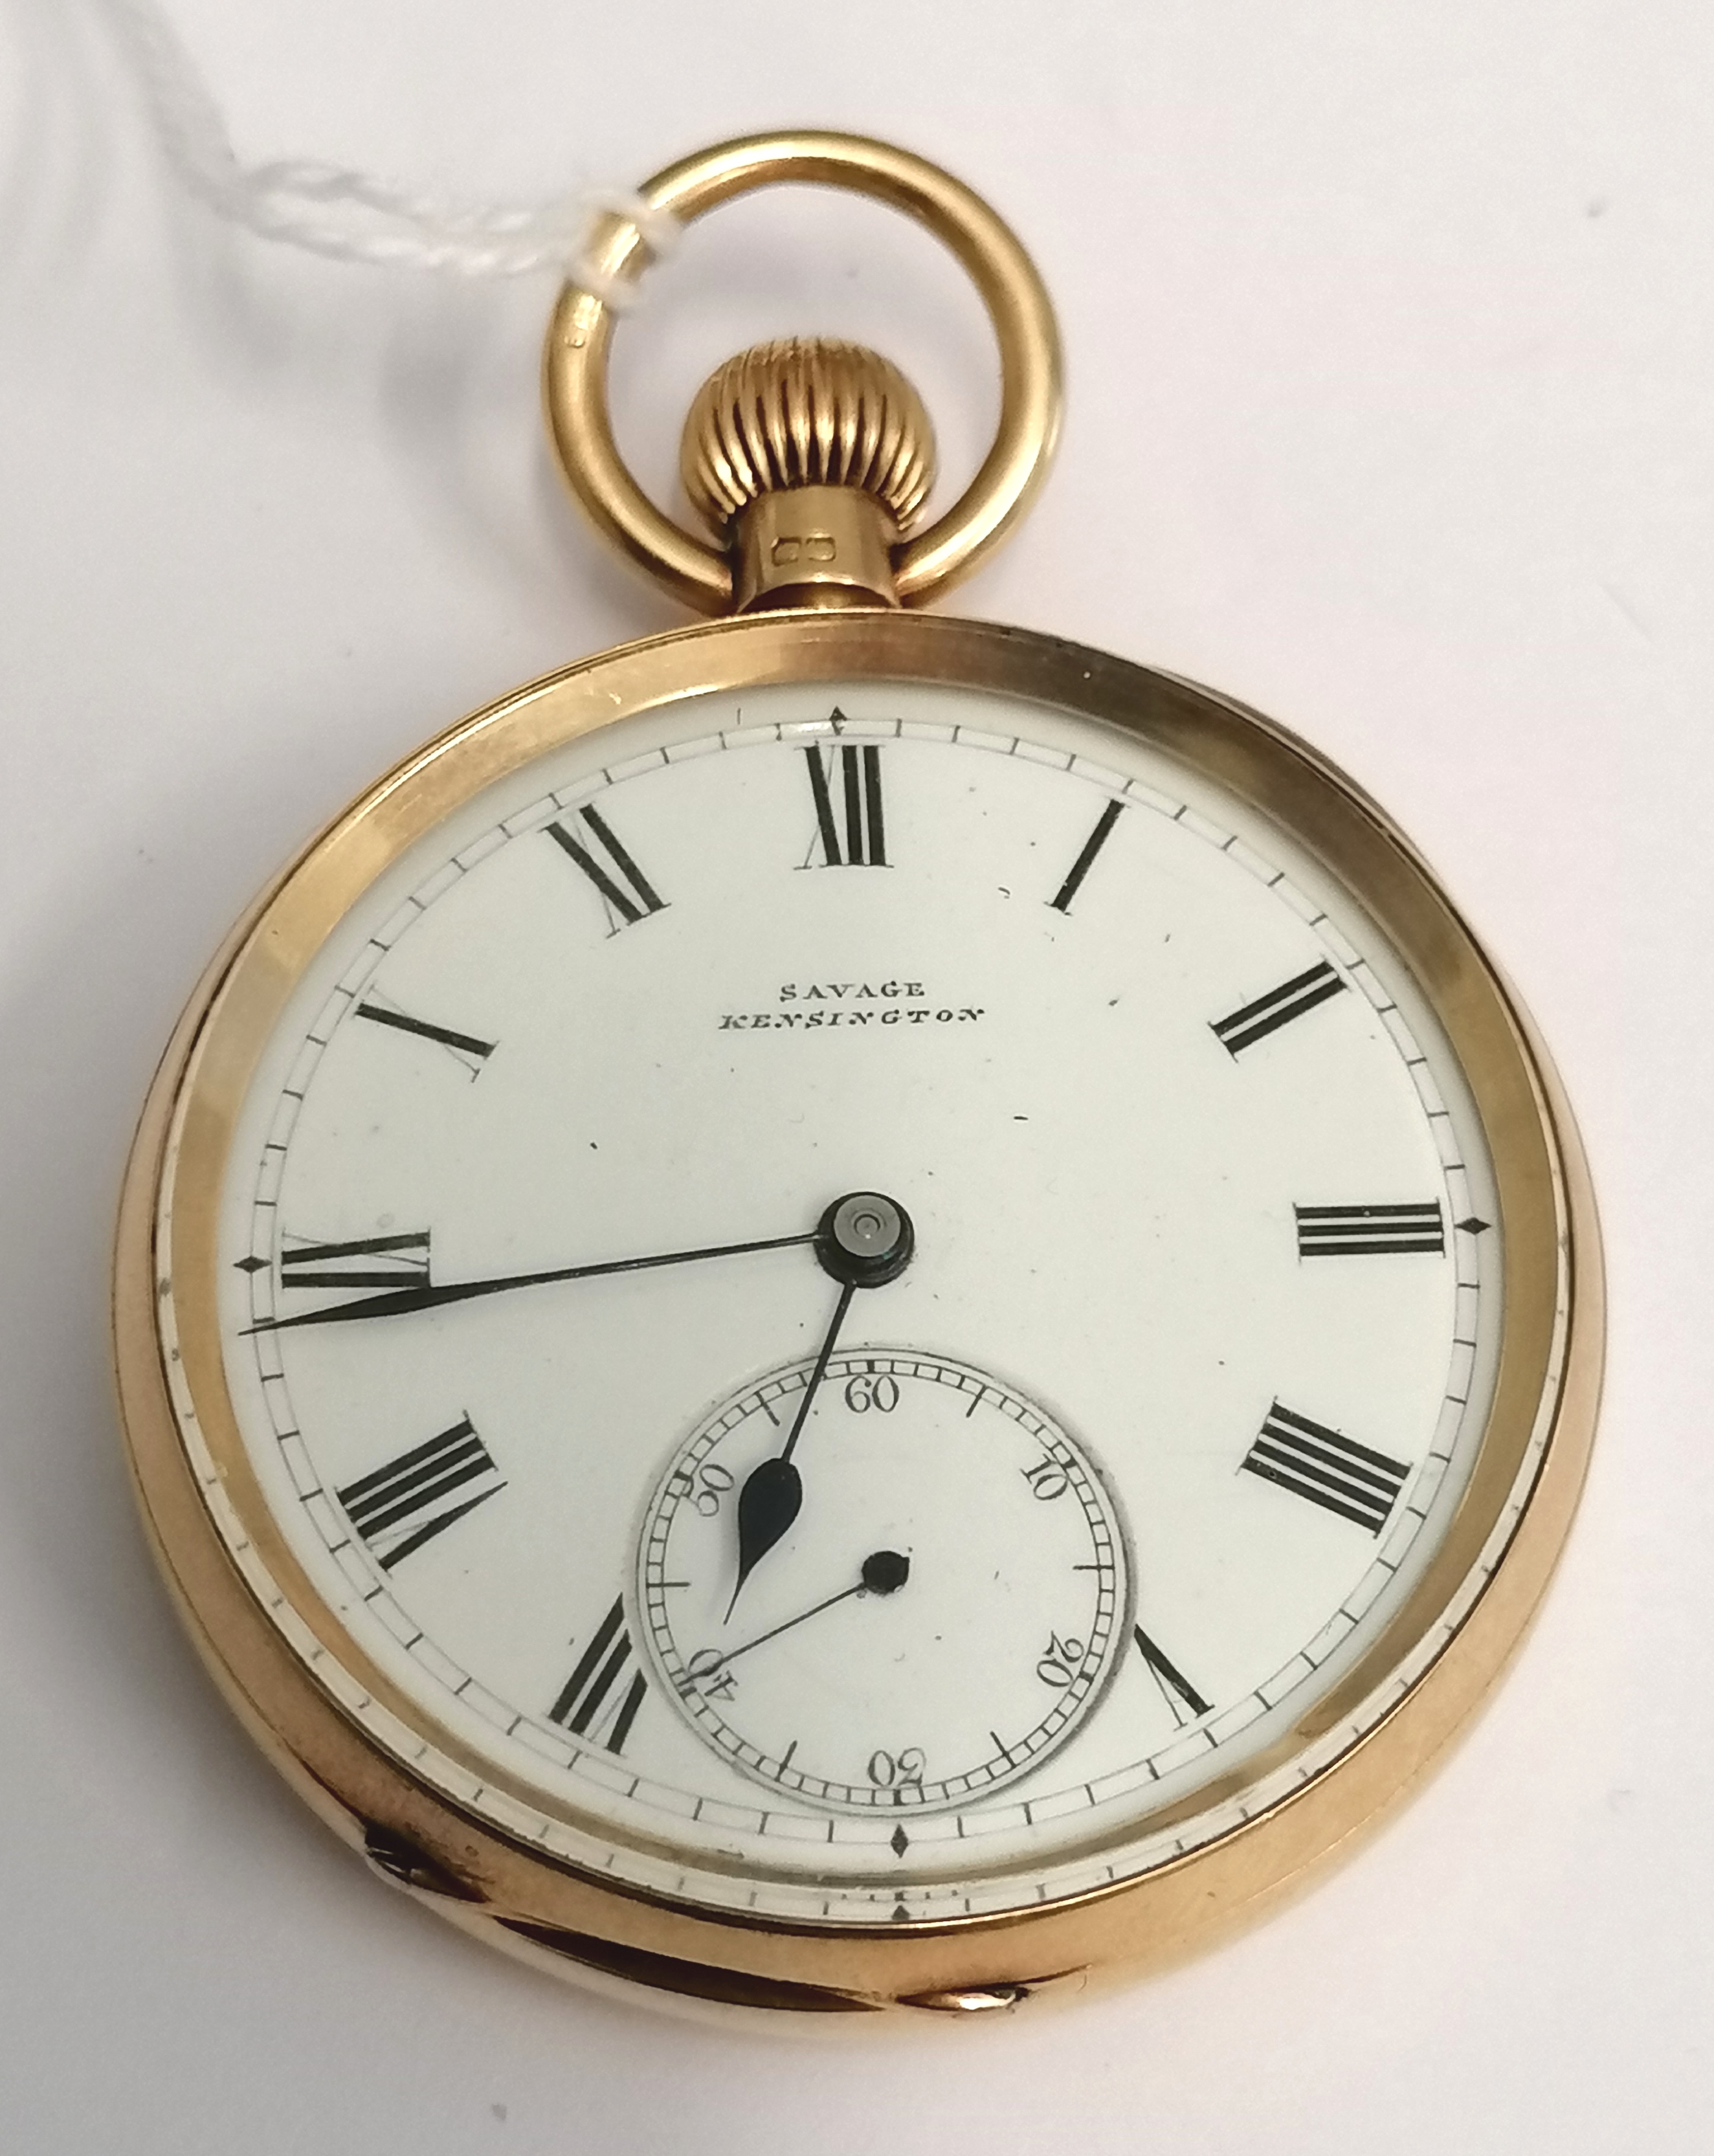 An 18ct gold pocket watch Savage, Kensington dated 1876-77 with Roman numerical enamel face.